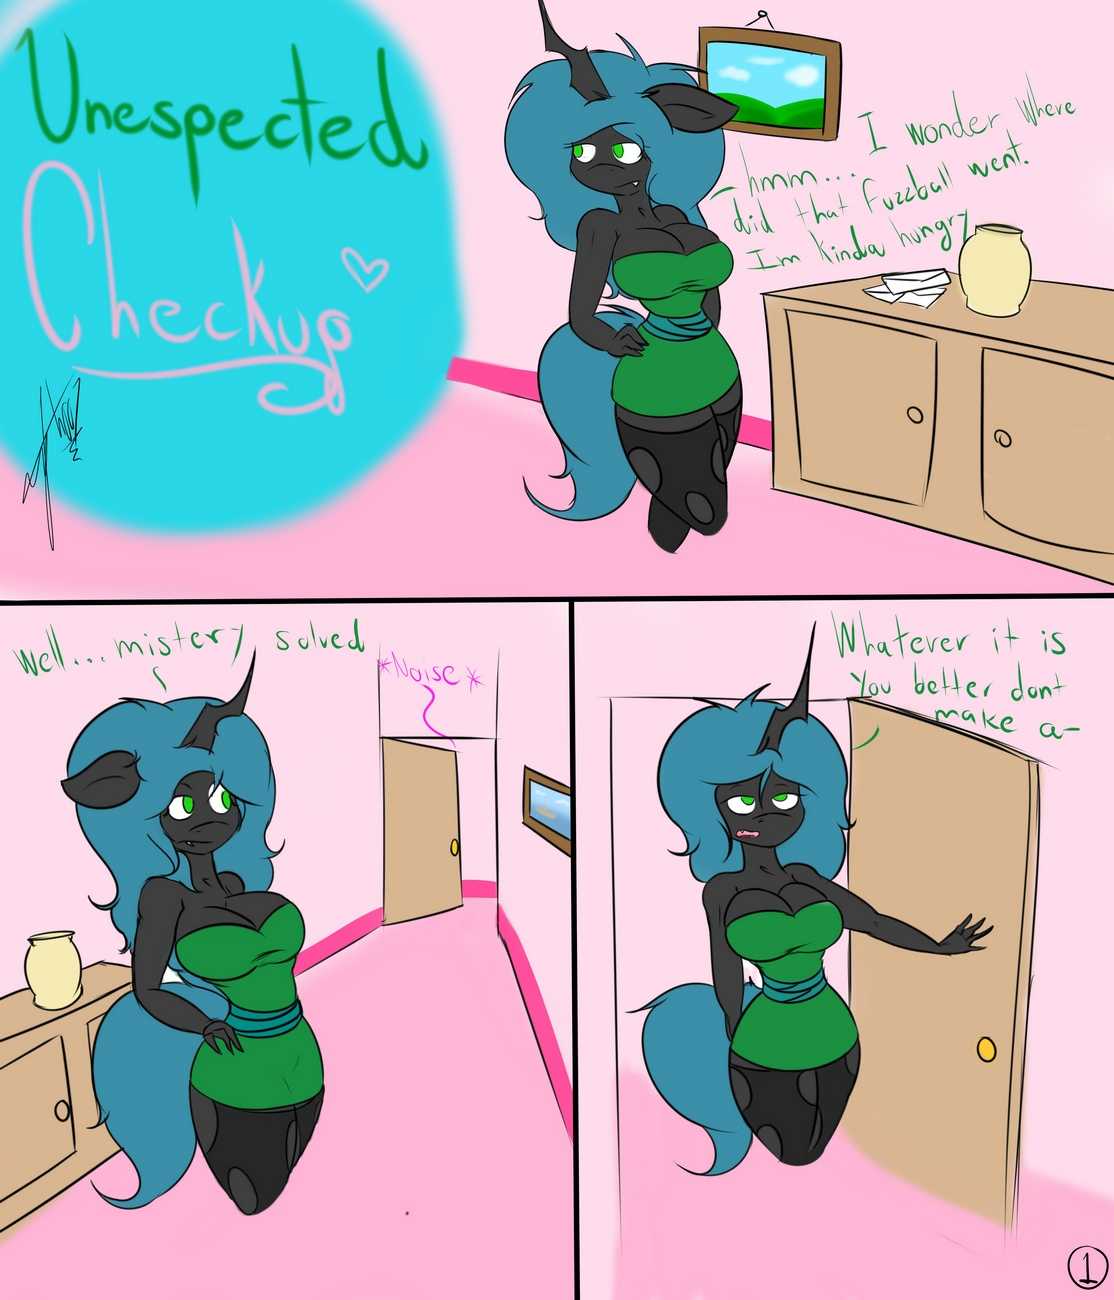 Unespected Checkup page 2